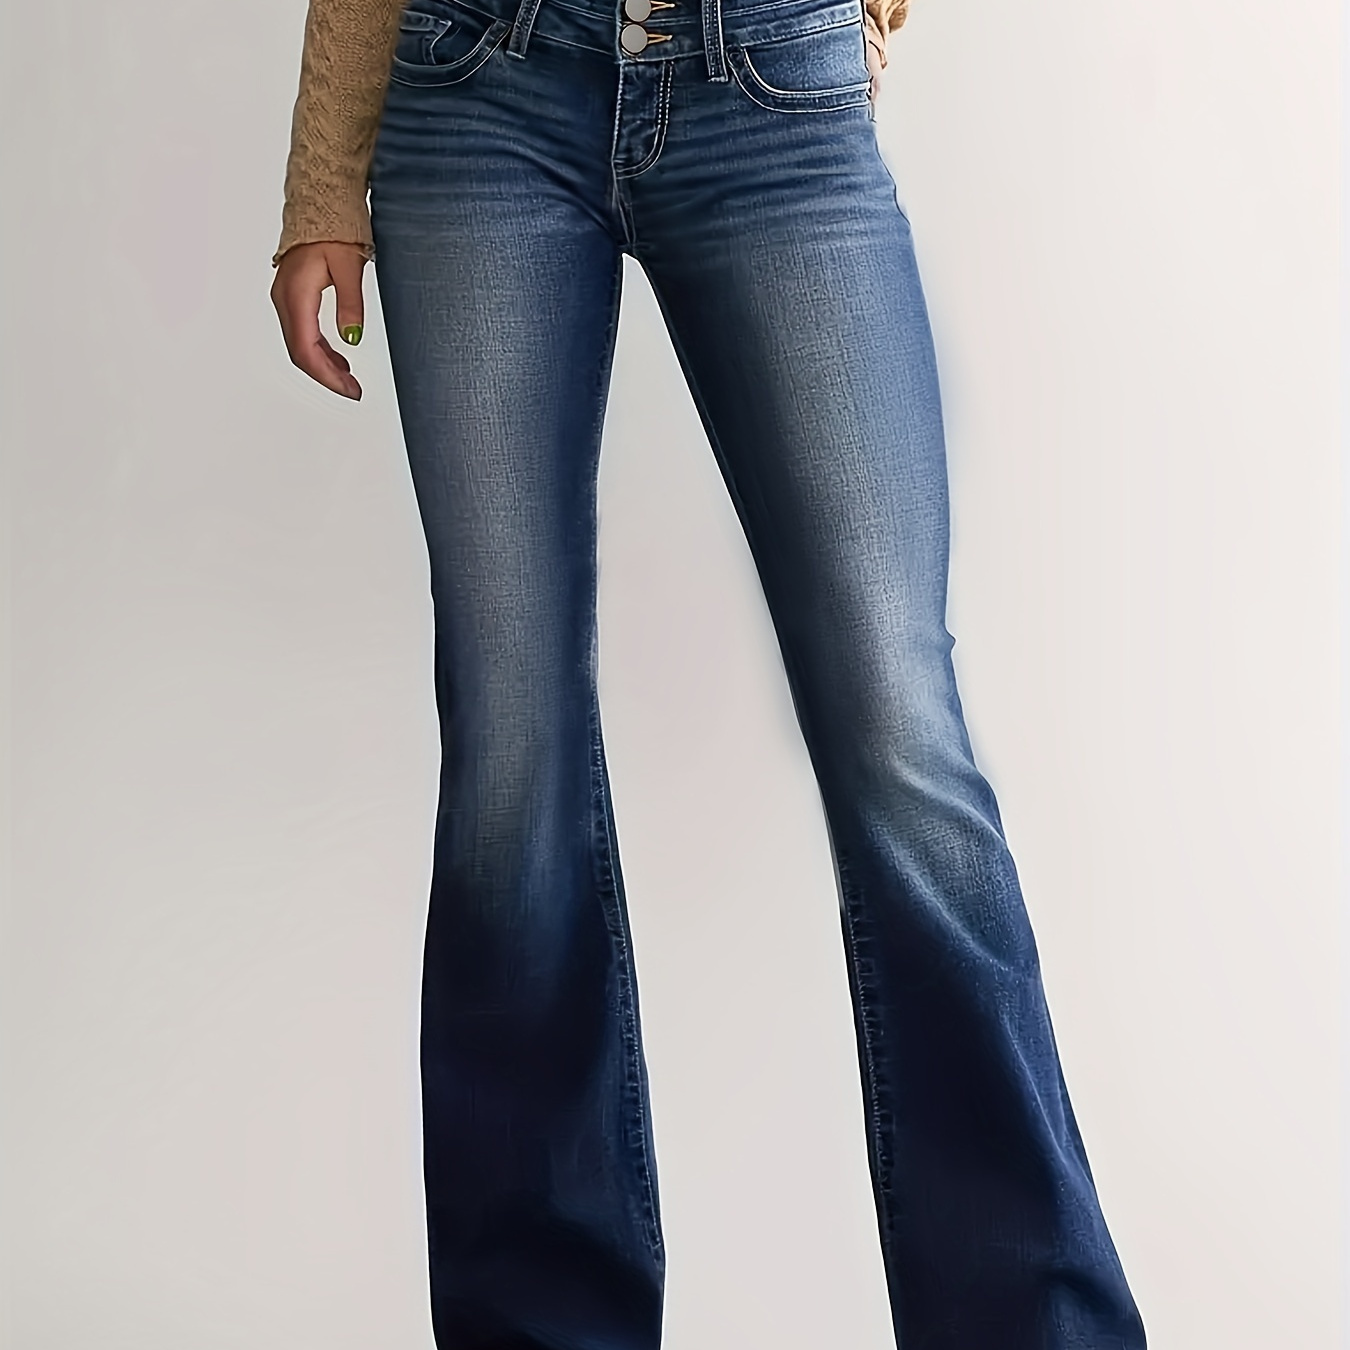 

Double Button Whiskering Flare Jeans, Slant Pockets High Stretch Bell Bottom Jeans, Women's Denim Jeans & Clothing